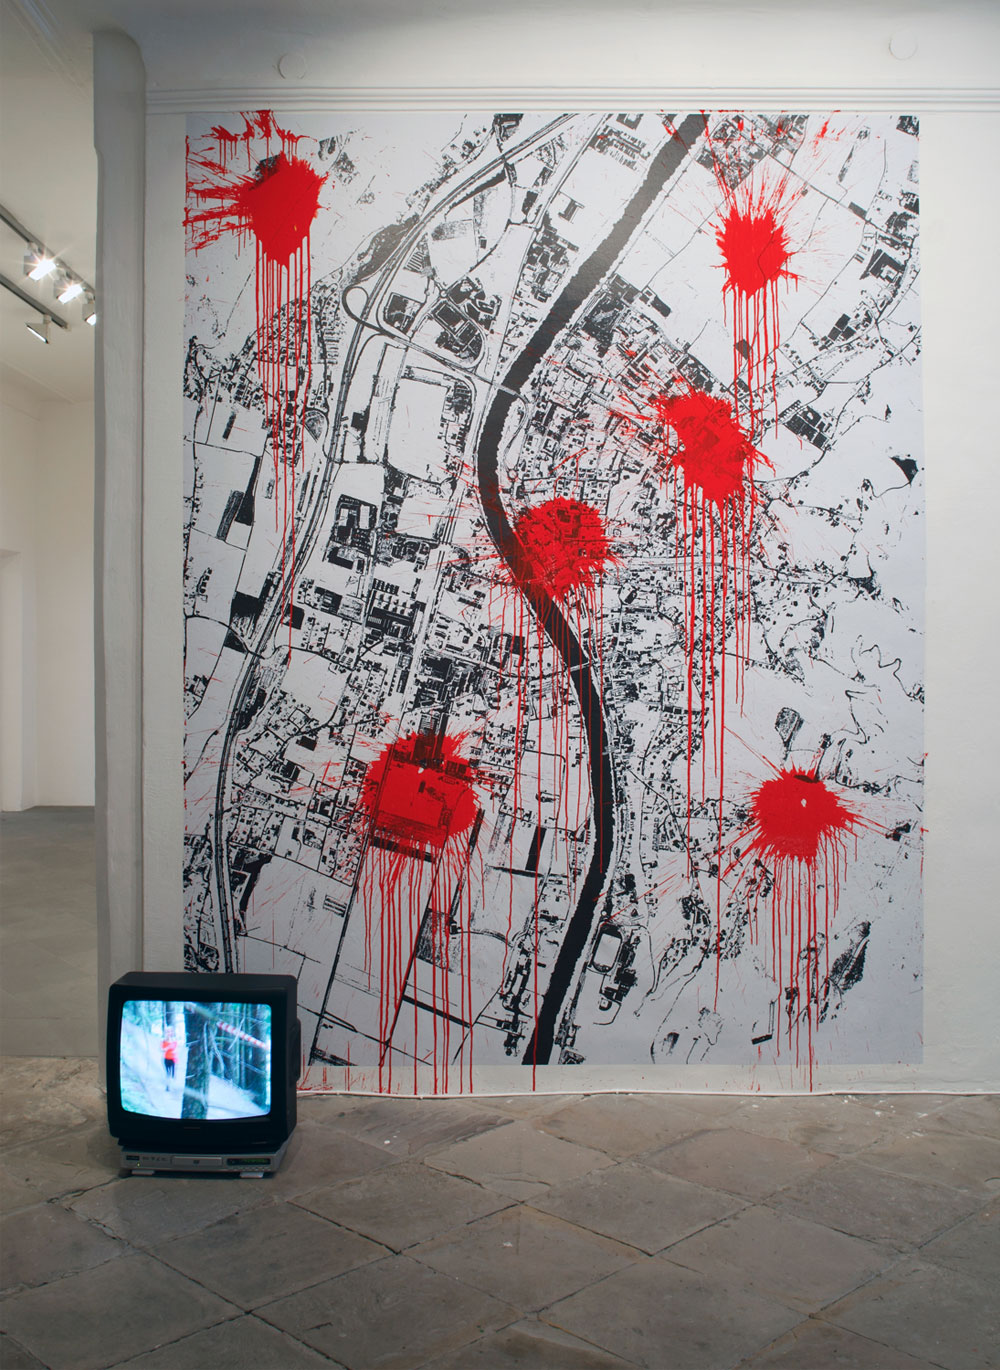 Exhibition view, Anarchy Now, 2011, Installation, scaleable, video, printed caution tape, acrylic on printed wallpaper (250 x 320 cm), Artist Jürgen Bauer